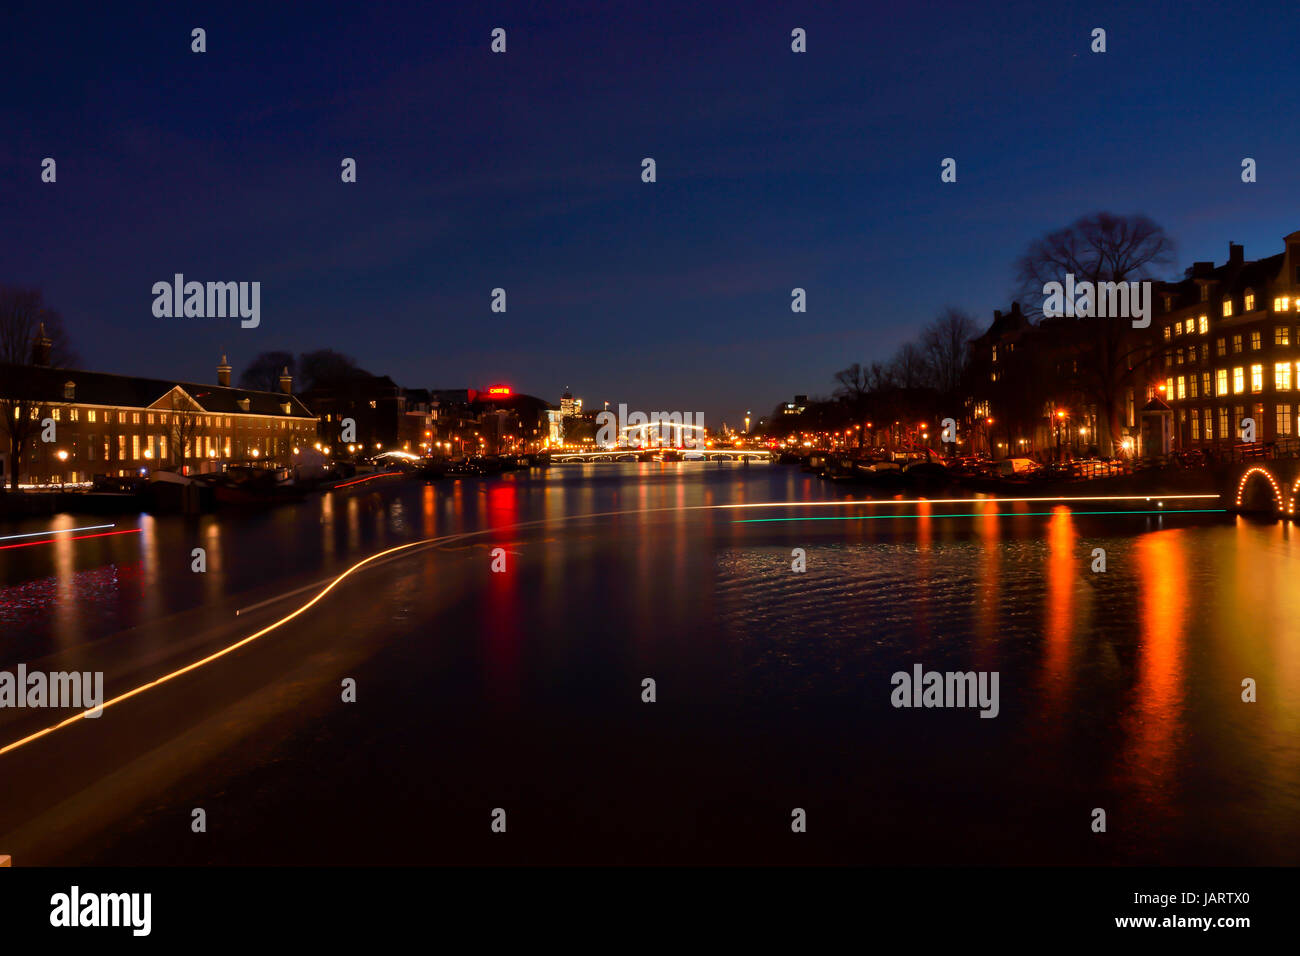 Trails of light on one of the major canals in Amsterdam at night Stock Photo